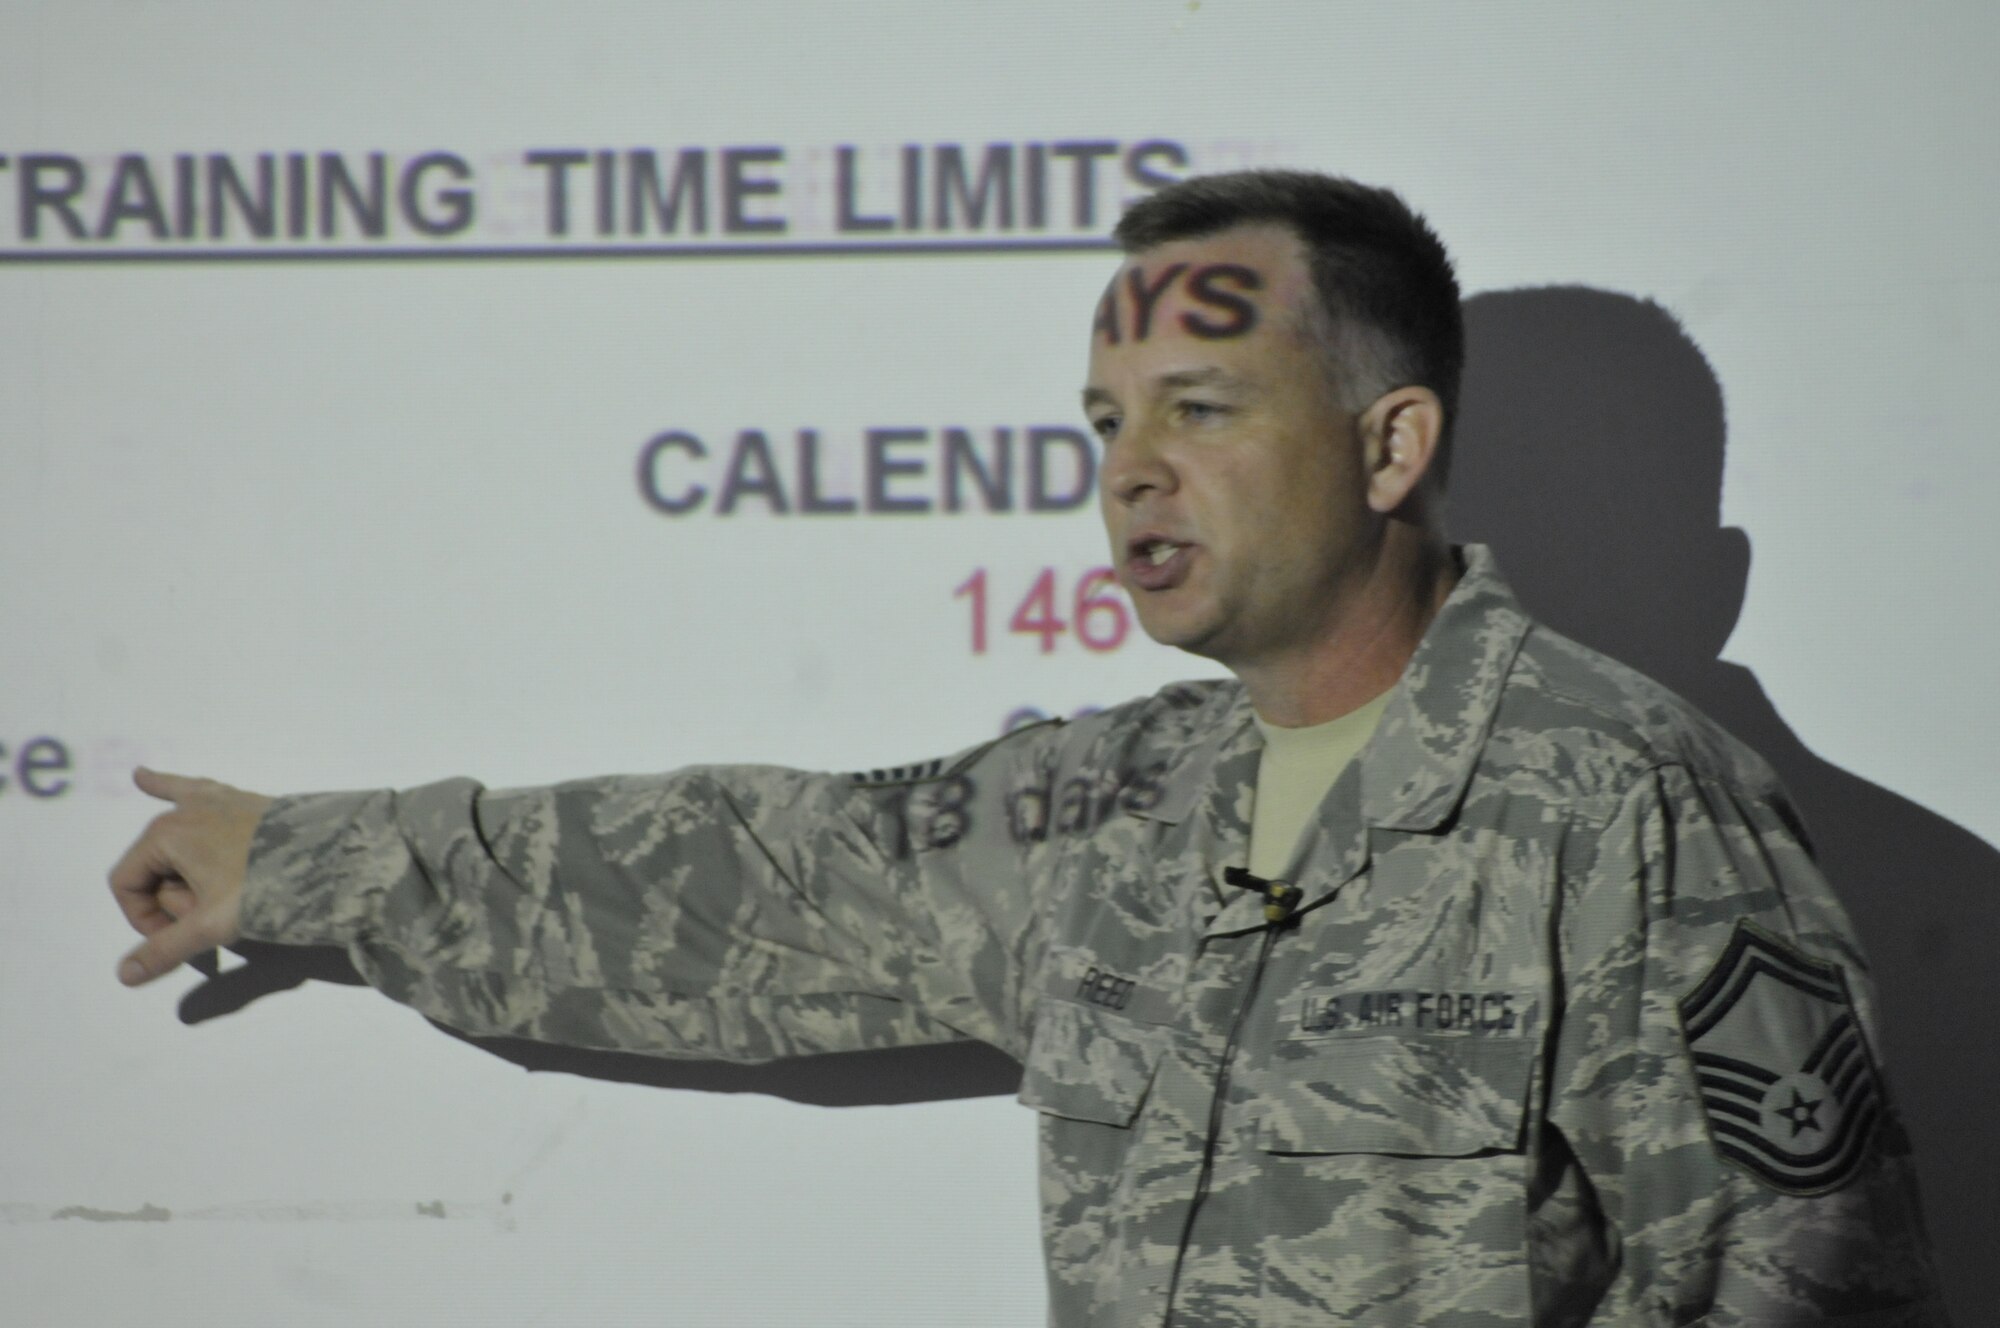 Senior Master Sgt. Richard Reed, 260th Air Traffic Control Squadron, briefs El Salvadoran Air Force air traffic controllers on how the Air National Guard trains their own air traffic controllers, as part of a week long Subject Matter Expert Exchange (SMEE) between the N.H. Air National Guard and the El Salvadoran Air Force, San Salvador, El Salvador, May 7 through 11, 2012.  This SMEE is part of the National Guard State Partnership Program. (Released/National Guard photo by Tech. Sgt. Aaron Vezeau)